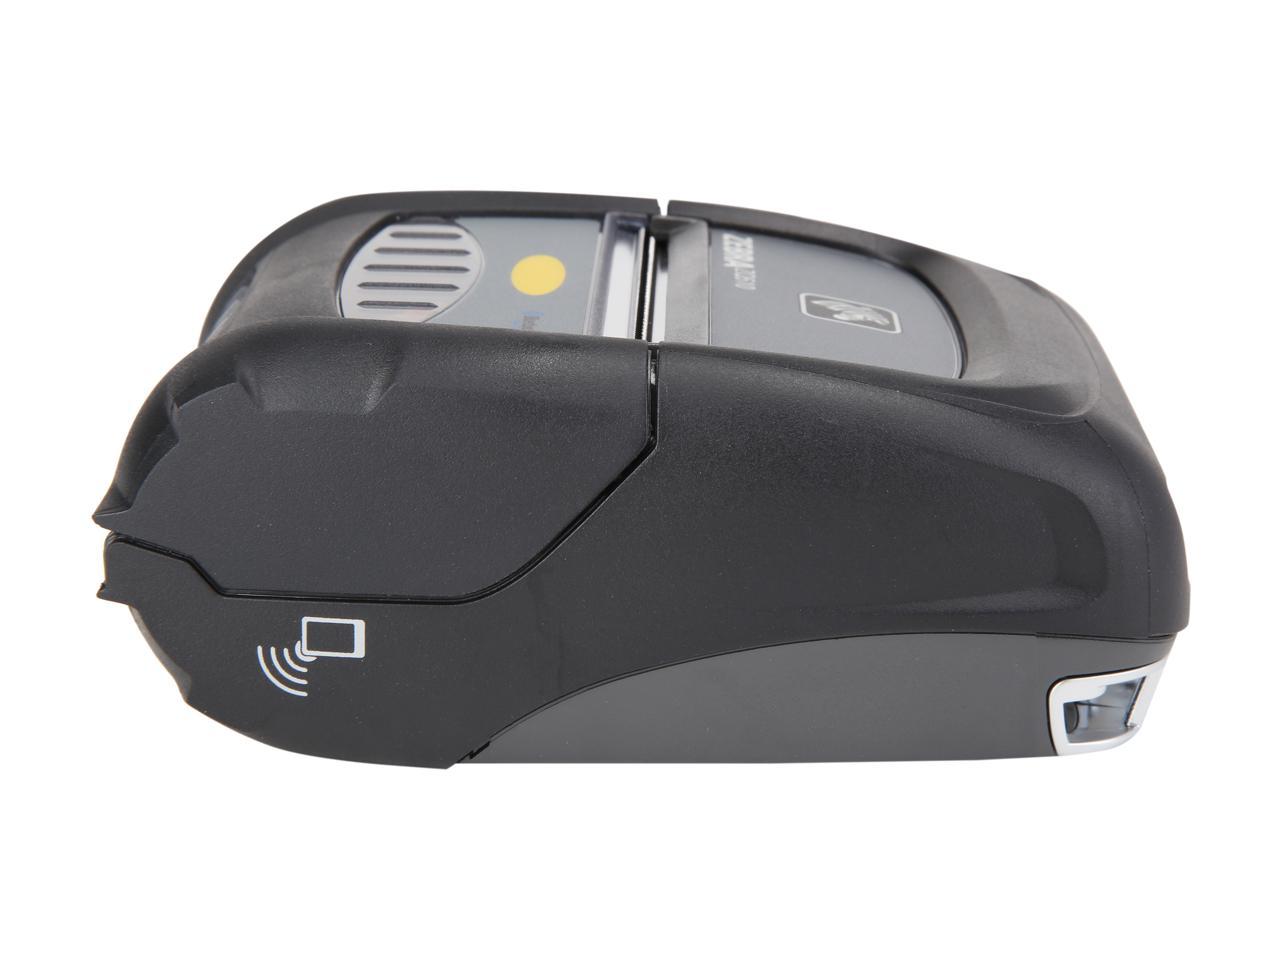 Zebra Zq510 3 Mobile Direct Thermal Receipt And Label Printer 203 Dpi Bluetooth 40 Linered 2761